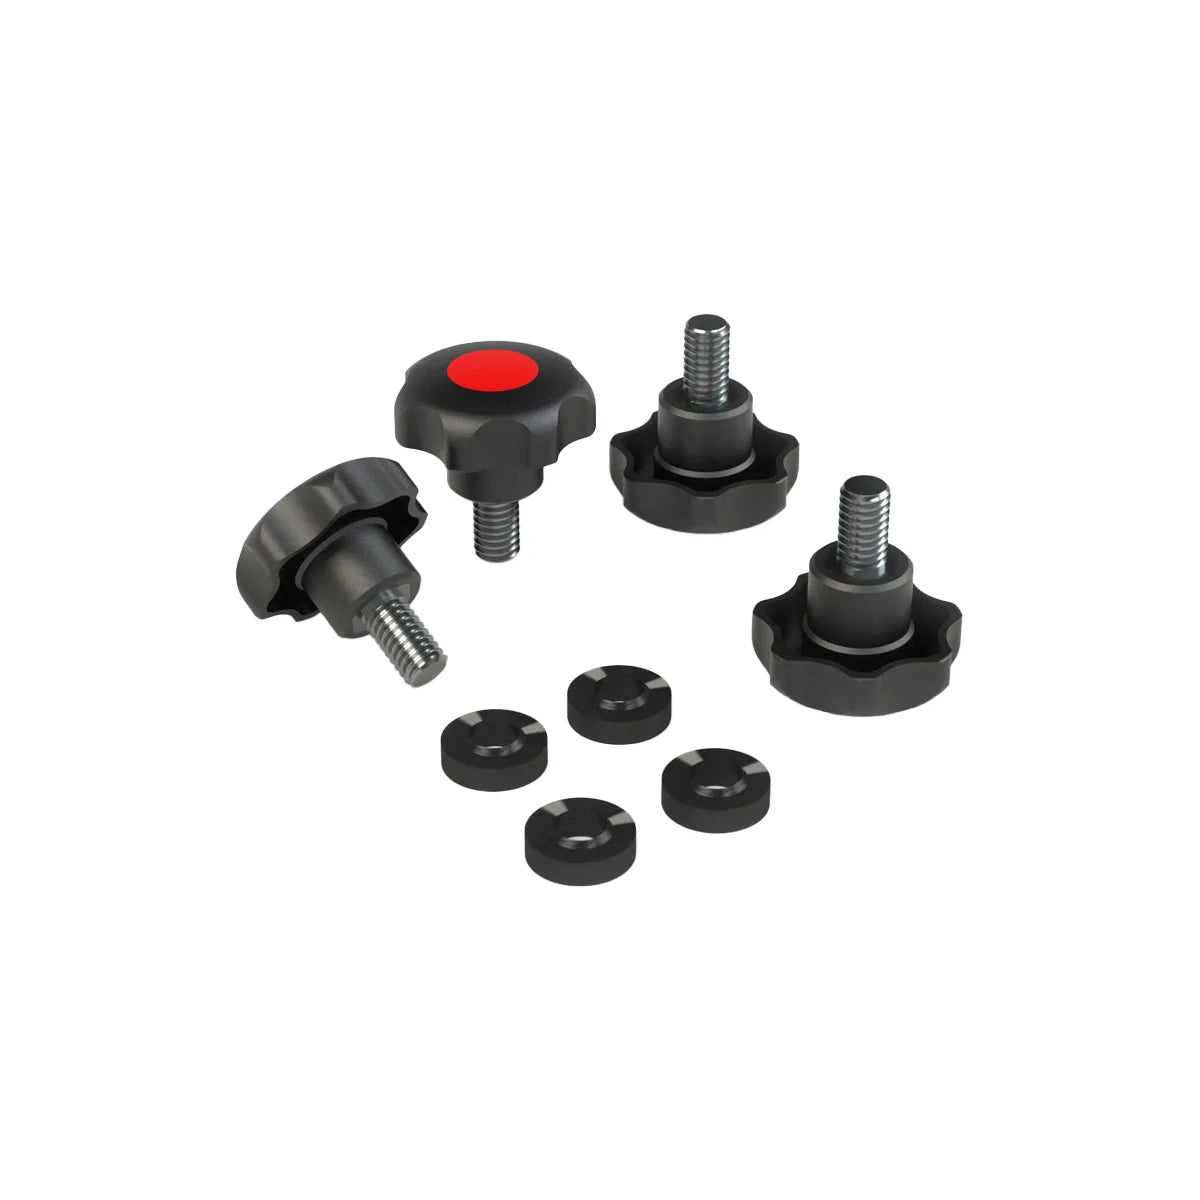 M6 Knob Set with Centering Spacers